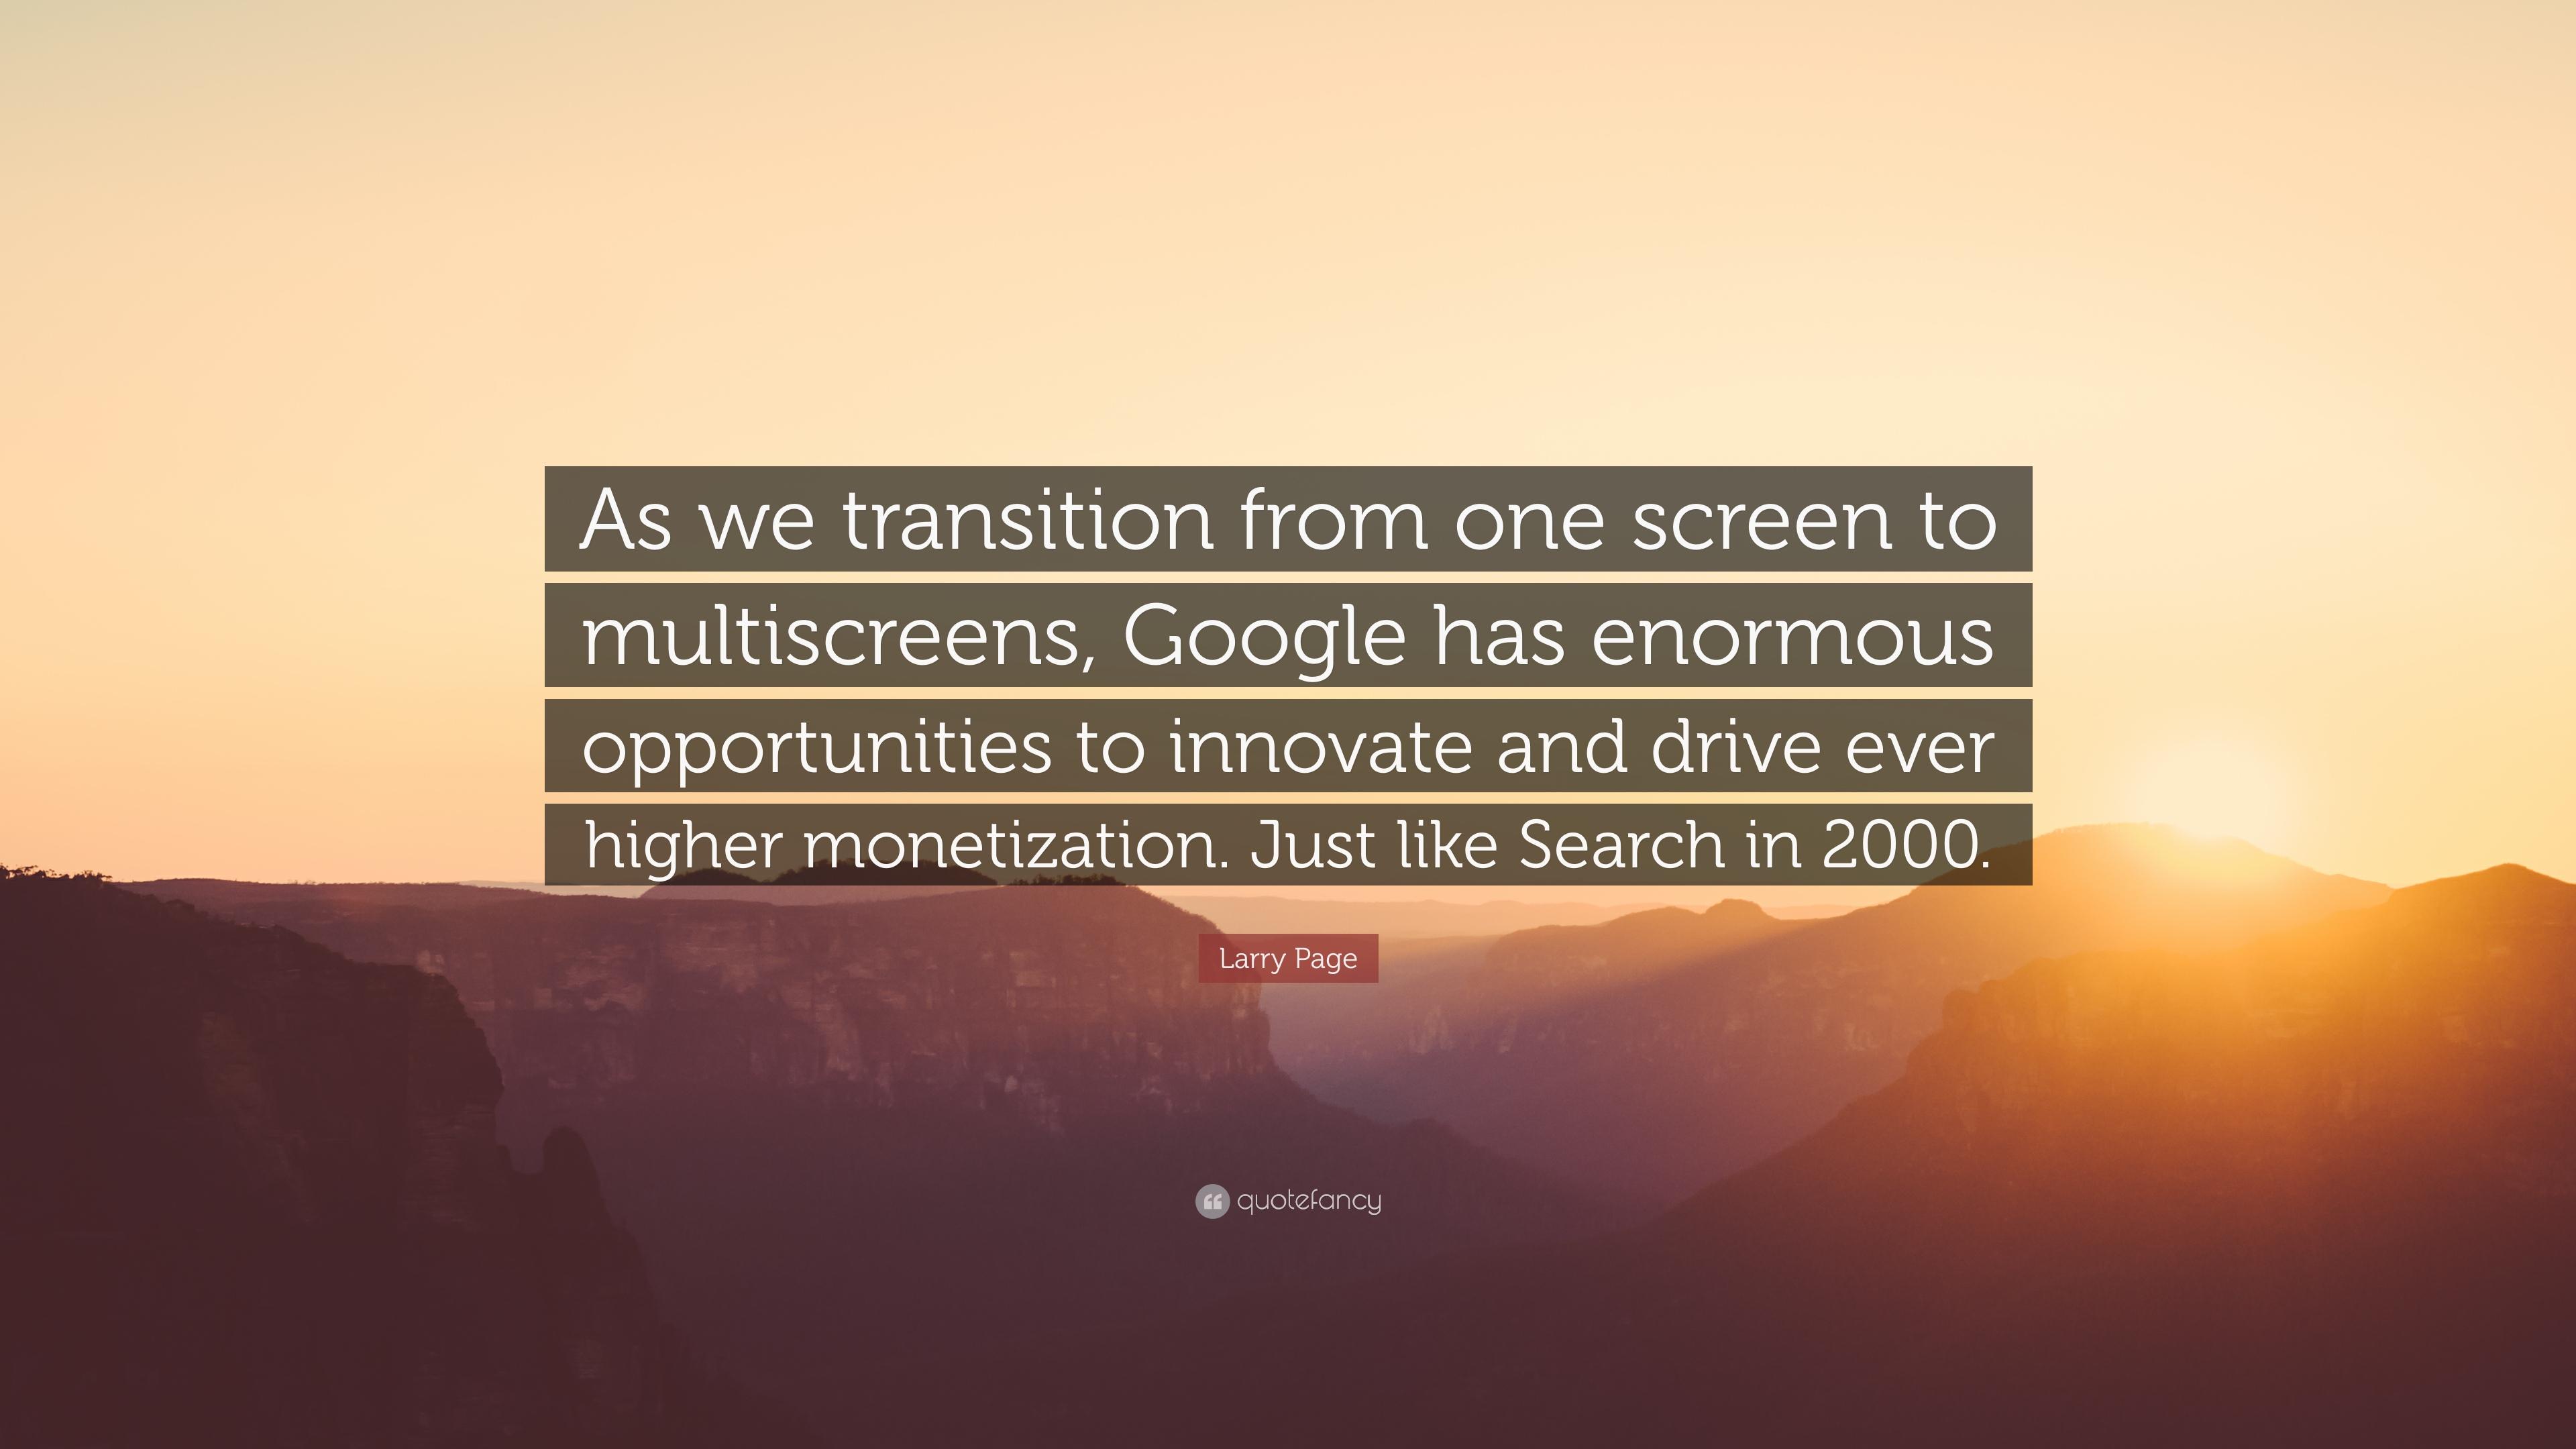 Larry Page Quote: “As we transition from one screen to multiscreens